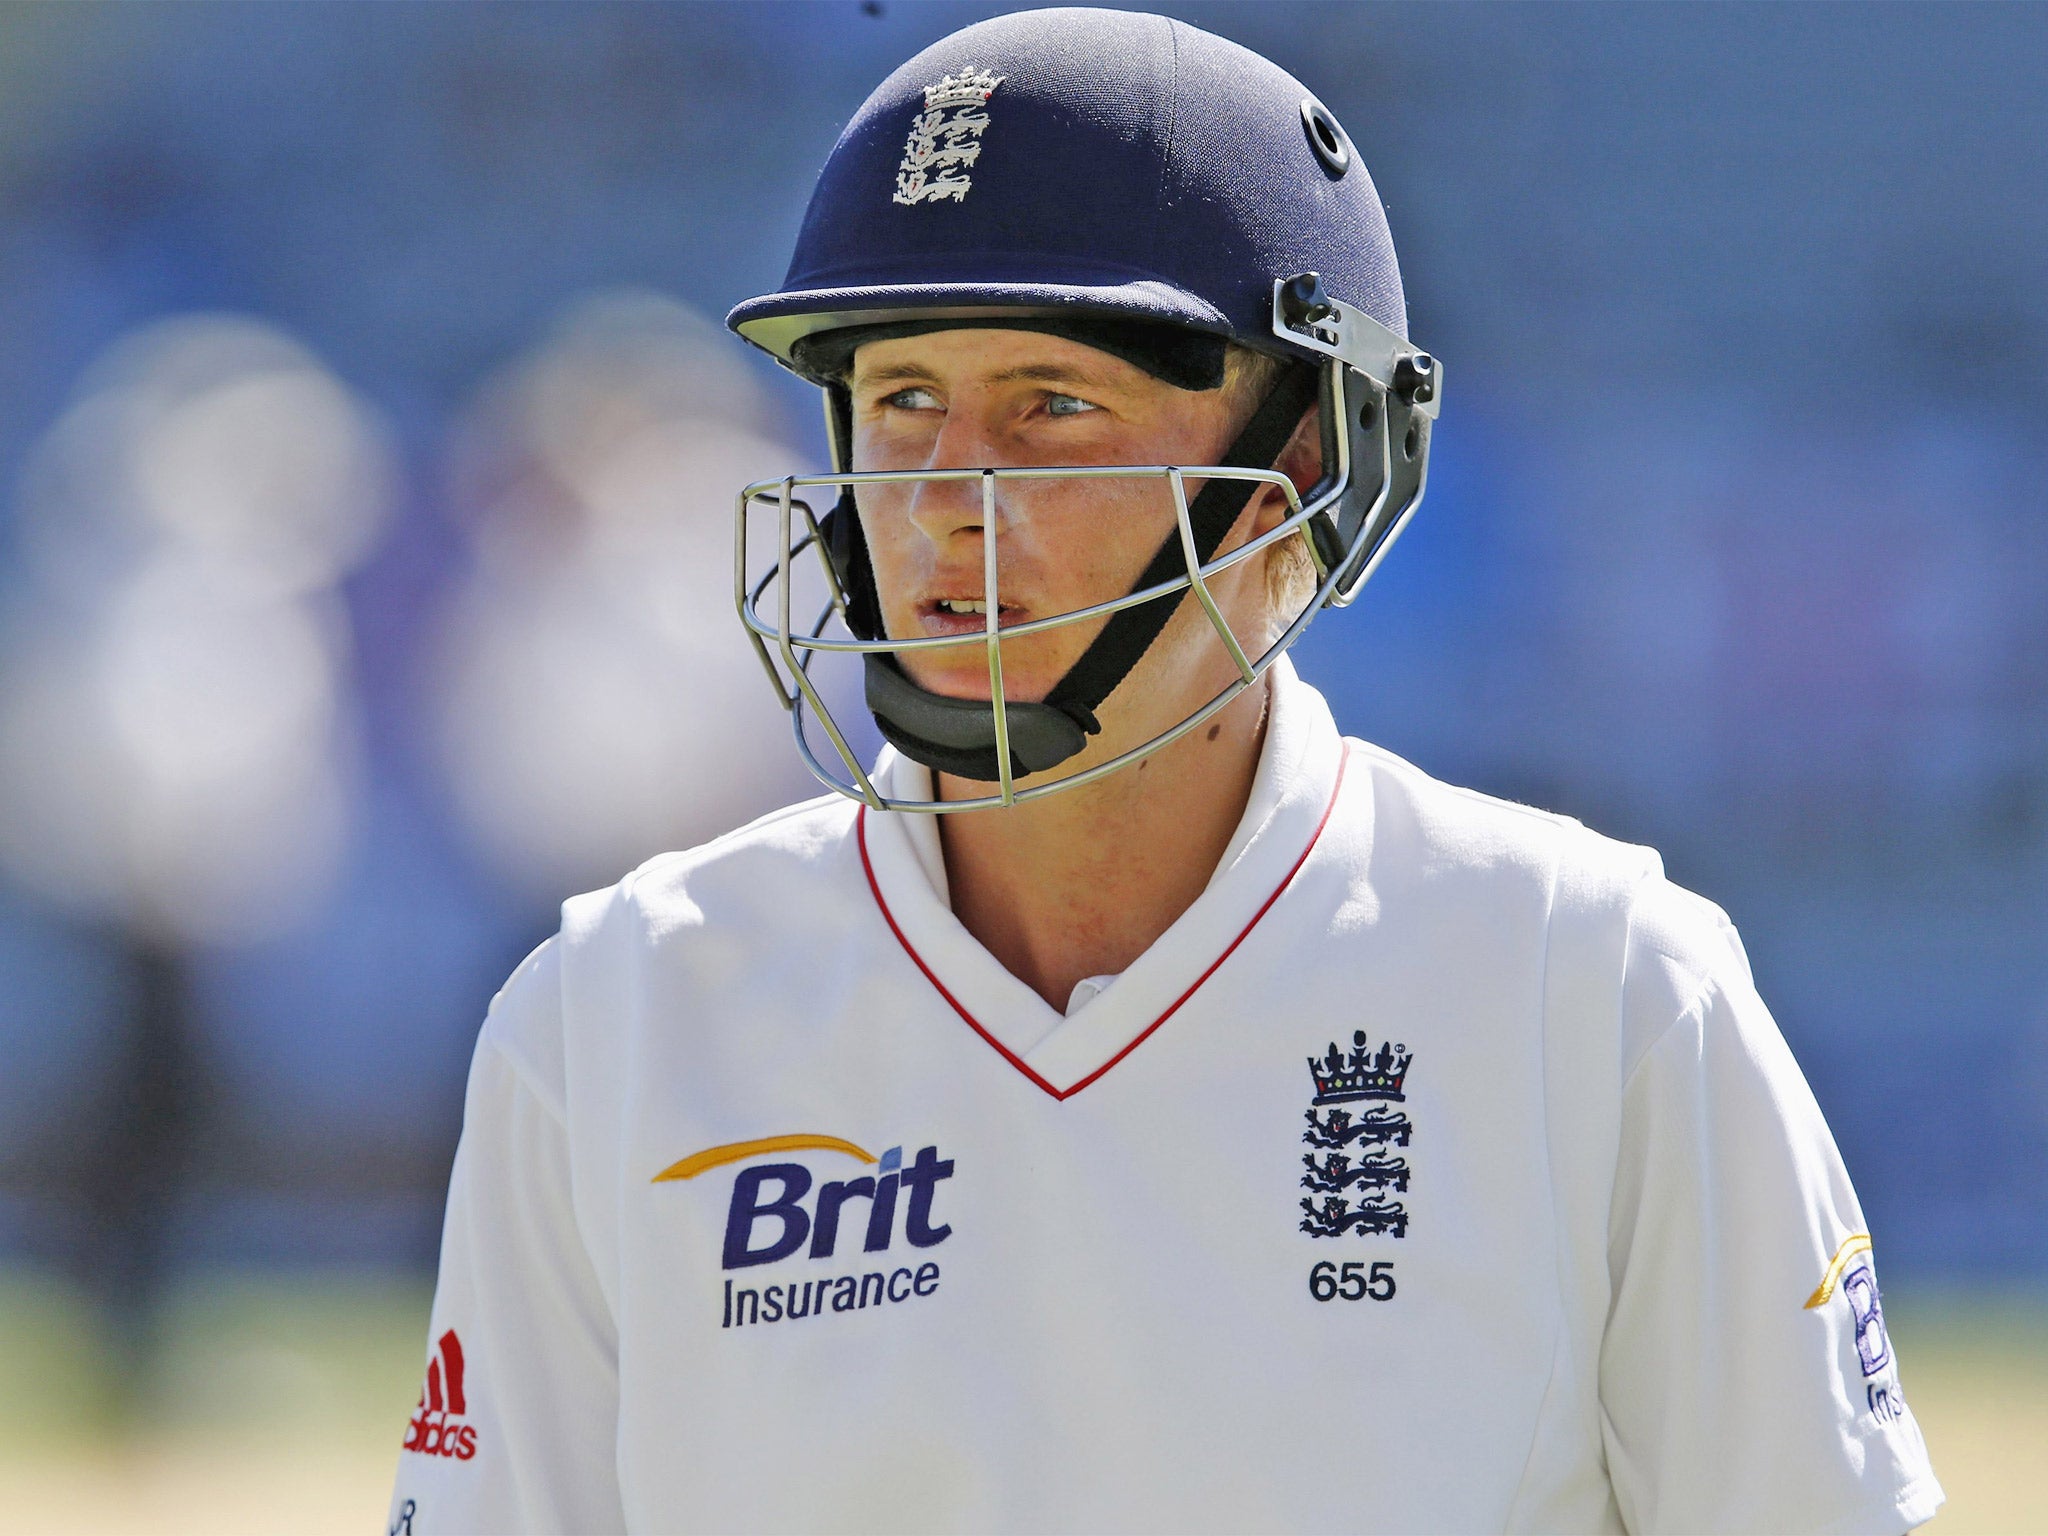 Joe Root will open the innings for his county, and could still do so for England